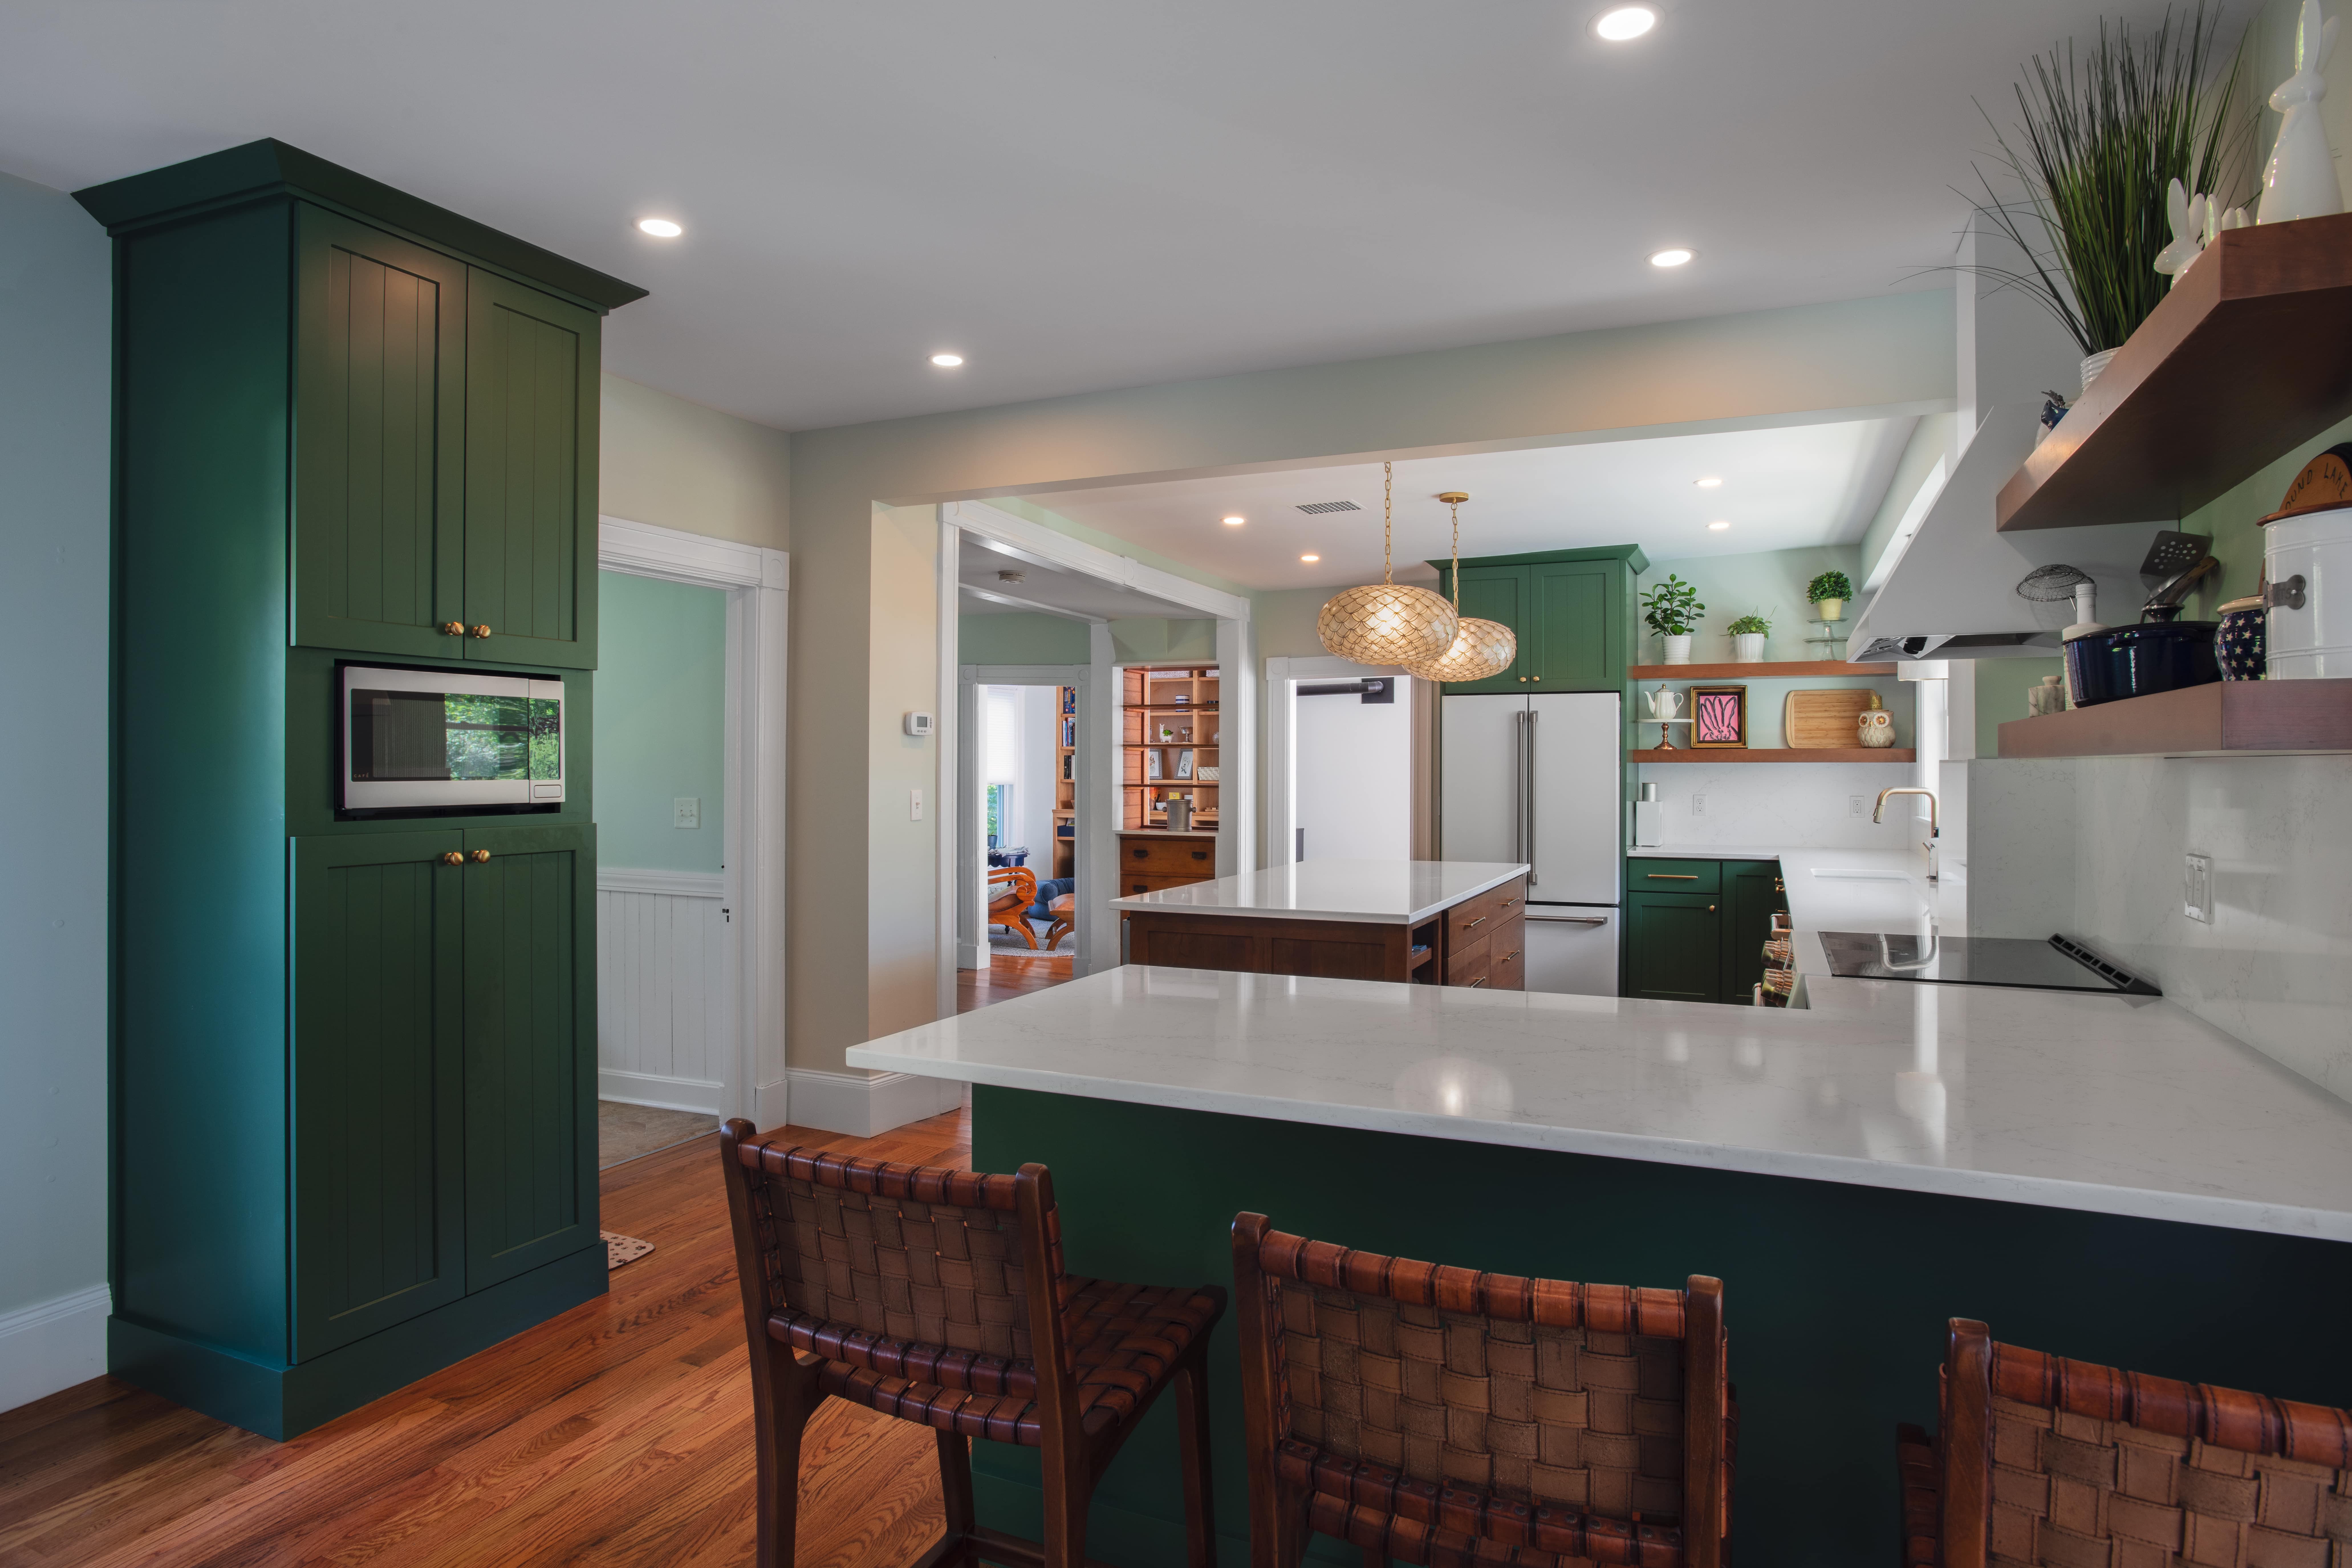 Remodeled kitchen with green cabinets and sleek granite countertops